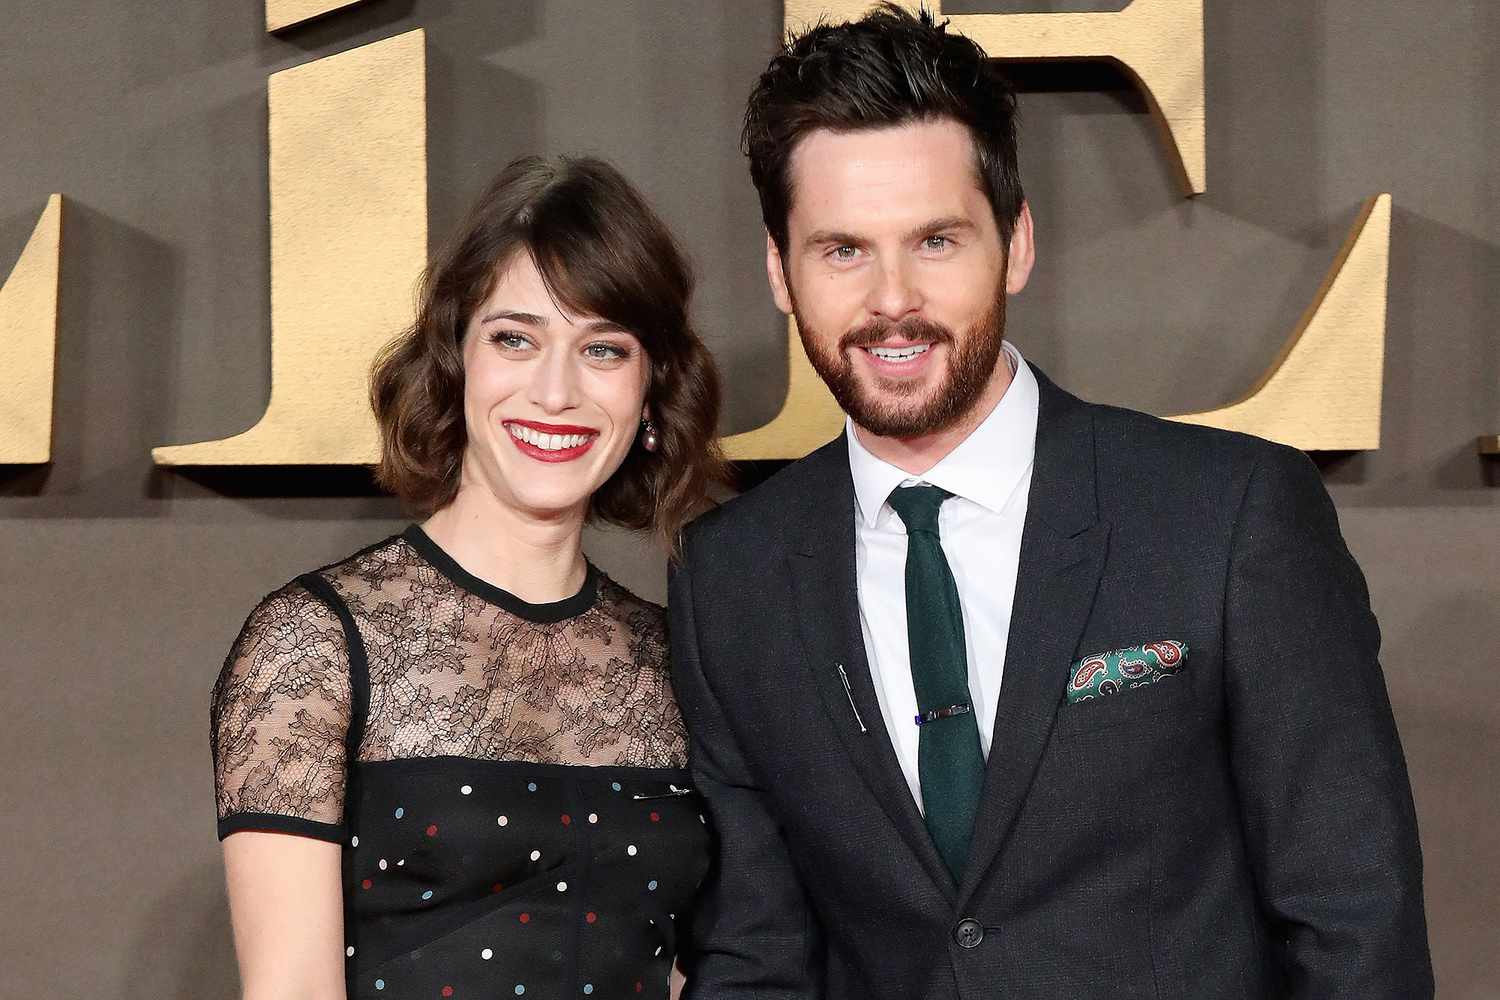 Lizzy Caplan and her husband.